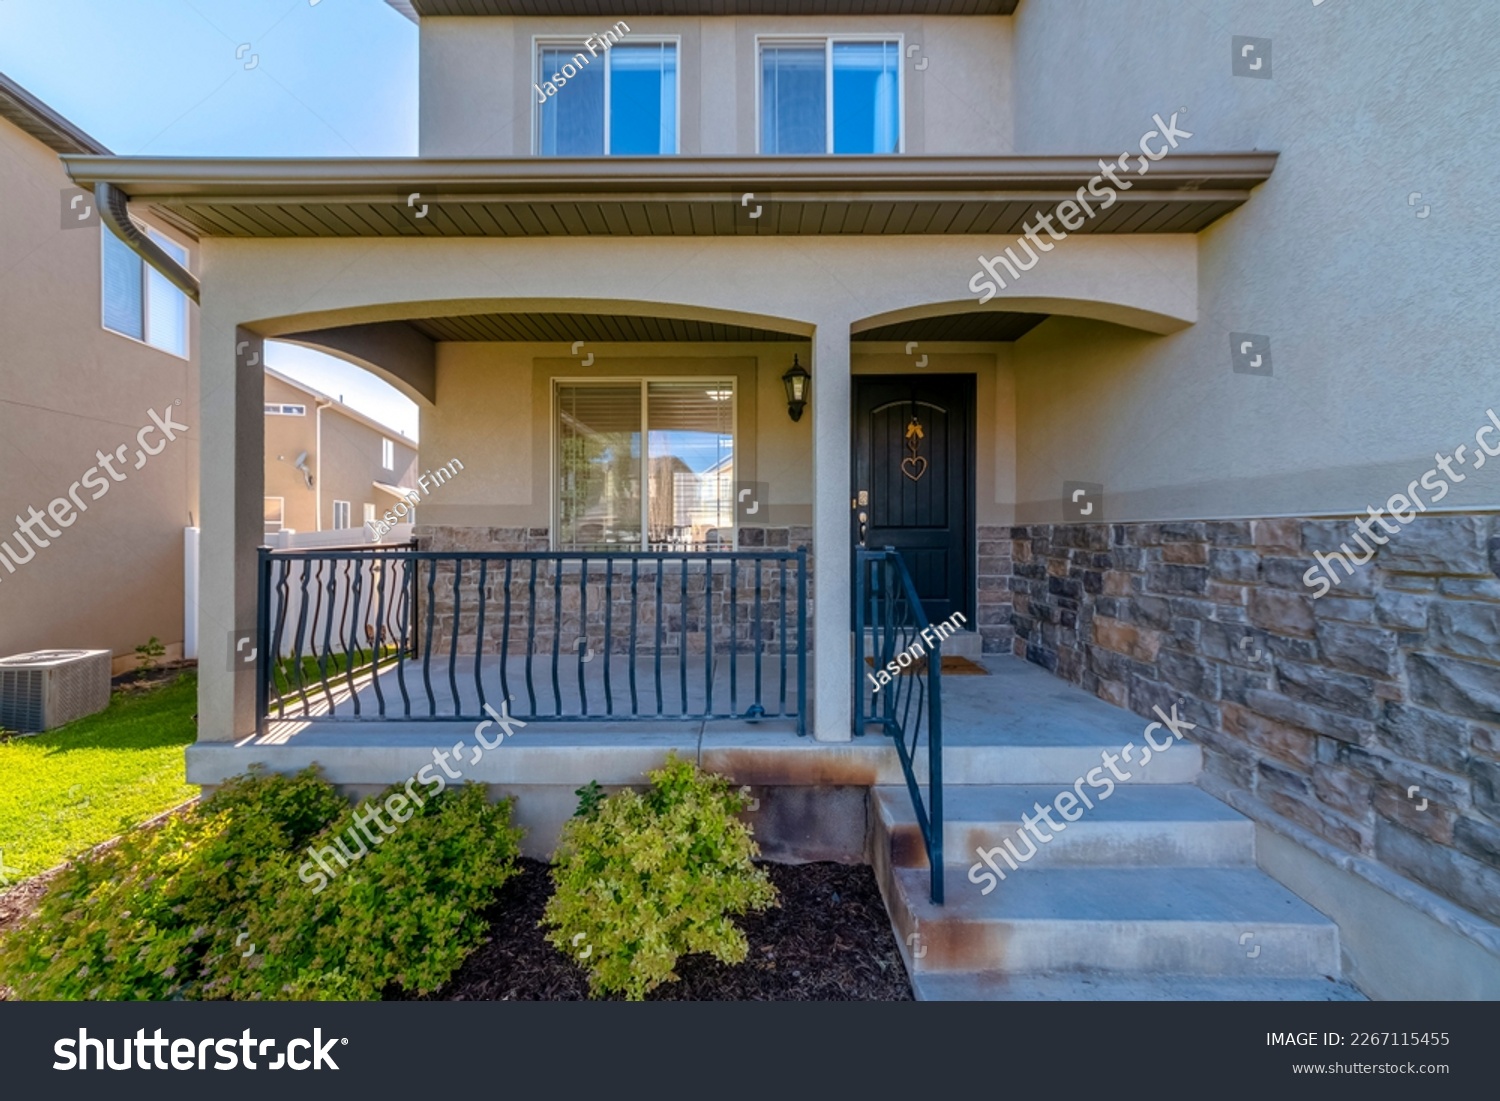 House entrance at the side of a wall with stucco and stone veneer. House exterior with railings on the porch at front of the window beside the black front door with hanging ornaments. #2267115455